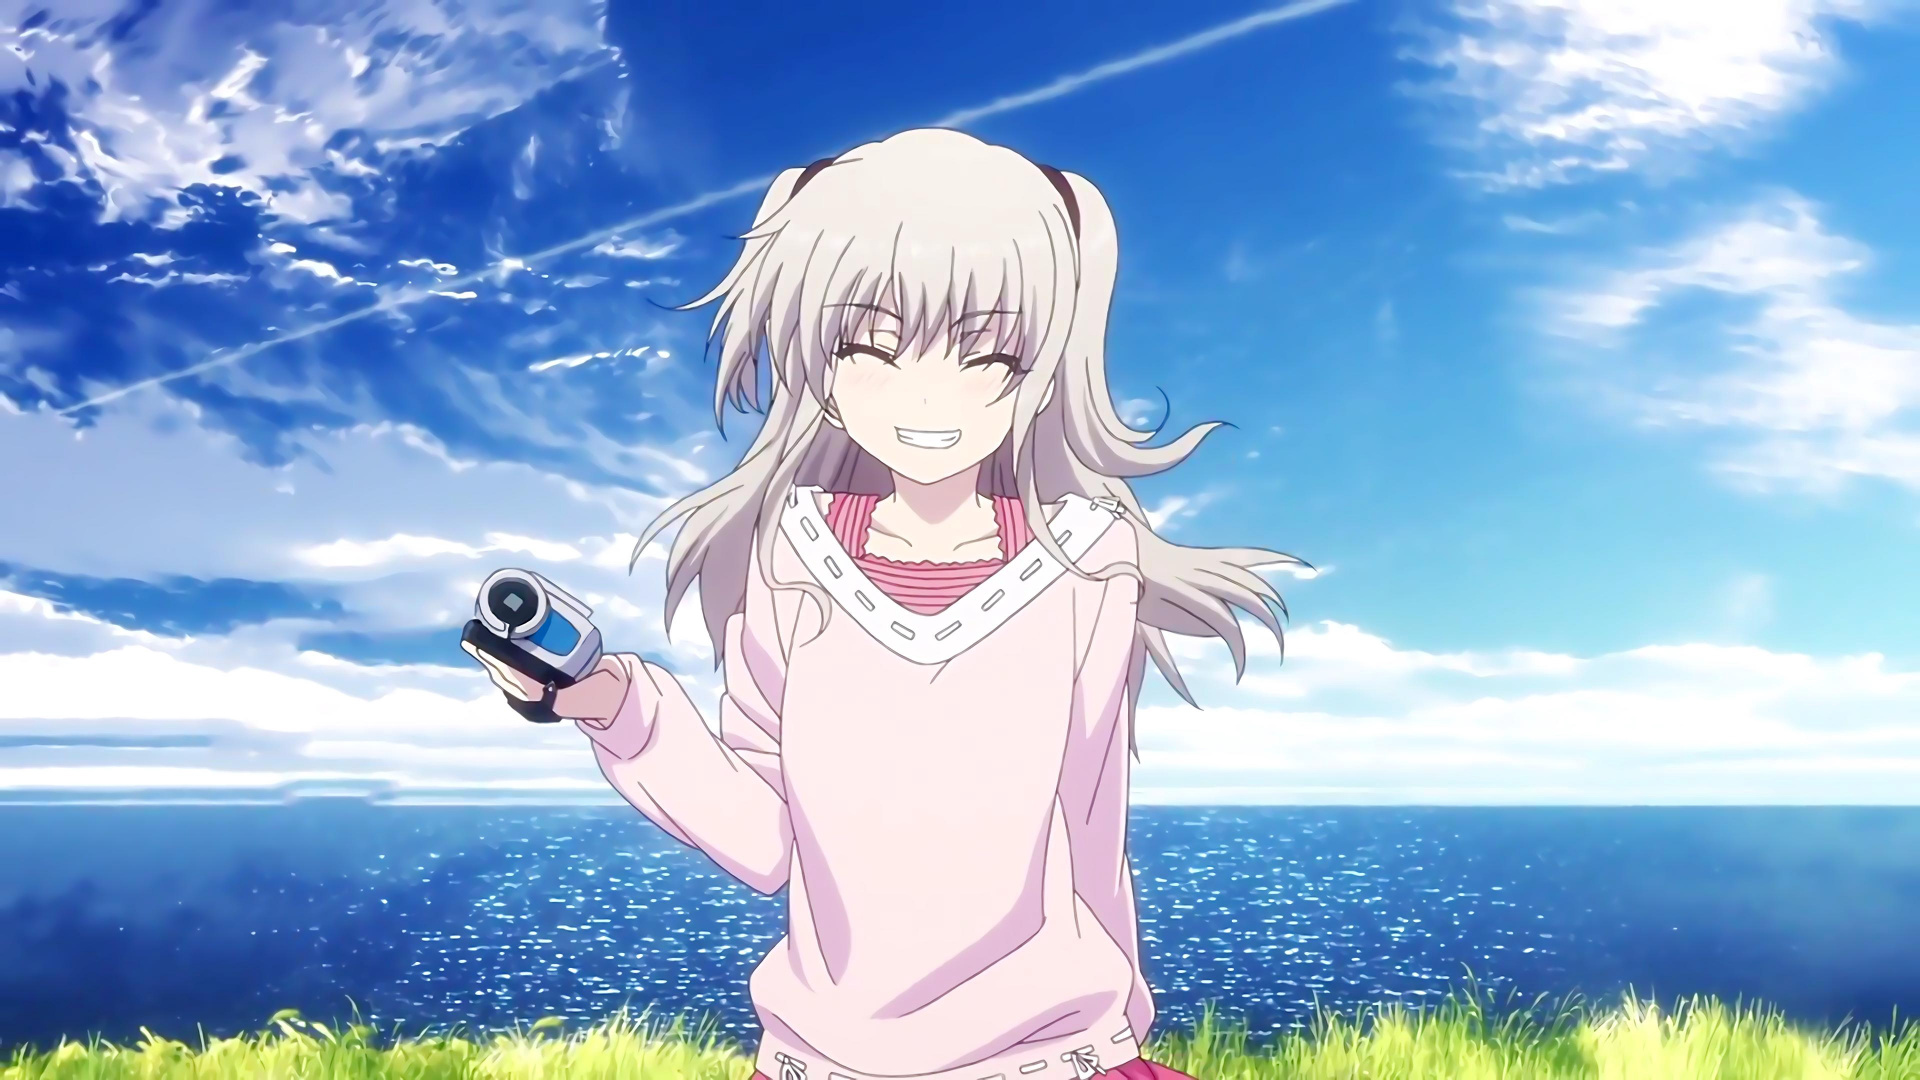 Girl in Pink Long Sleeve Shirt Holding Black and Silver Microphone Anime Character. Wallpaper in 1920x1080 Resolution